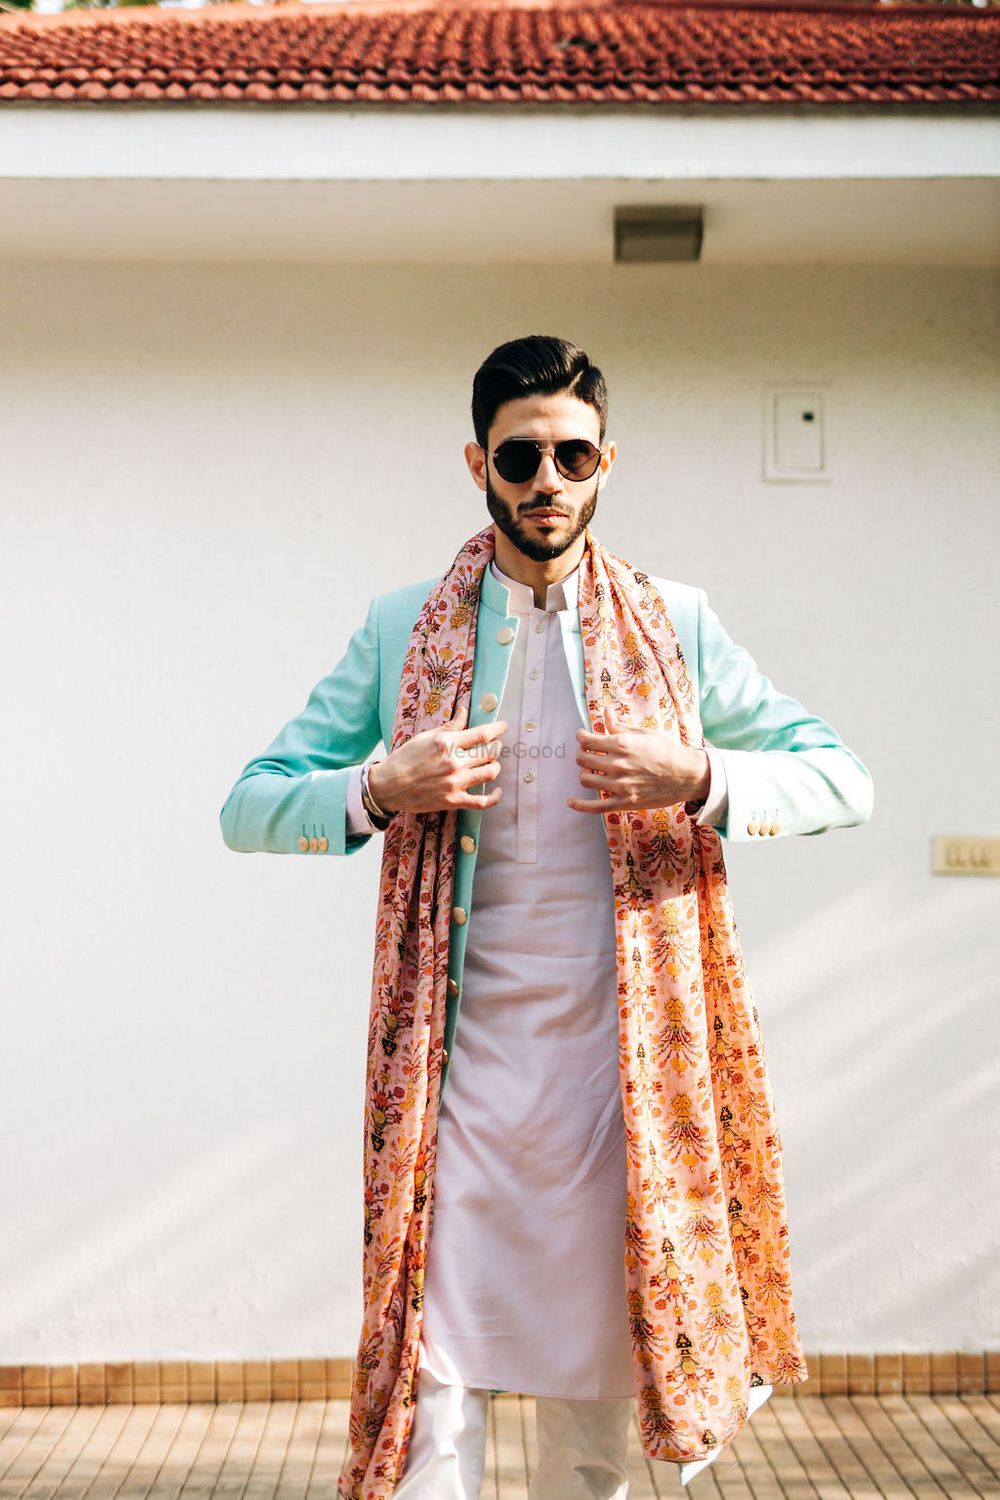 Photo of The groom on mehendi in a white kurta with blue jacket and multicoloured dupatta